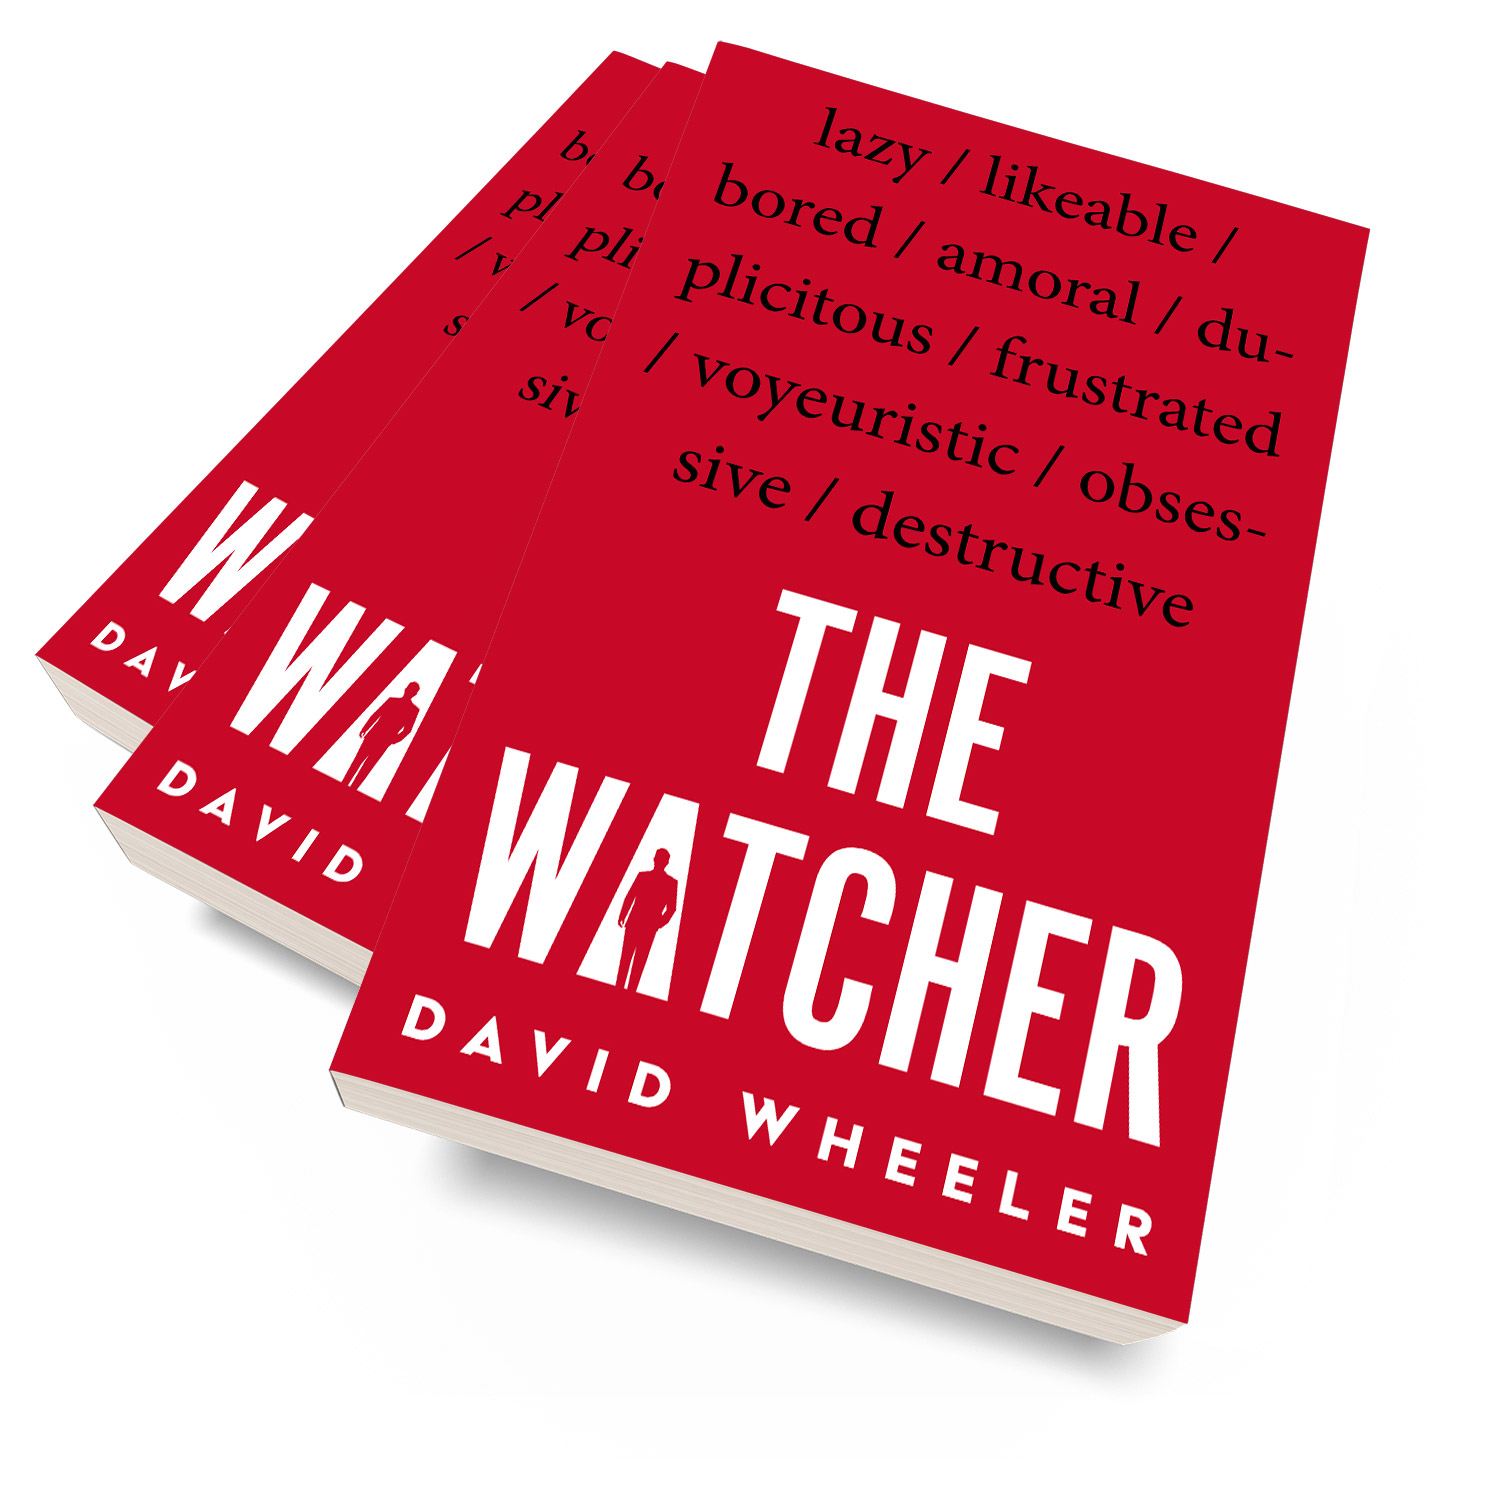 'The Watcher' is a cautionary tale of the perils of voyeurism. The author is David Wheeler. The book cover and interior were designed by Mark Thomas, of coverness.com. To find out more about my book design services, please visit www.coverness.com.